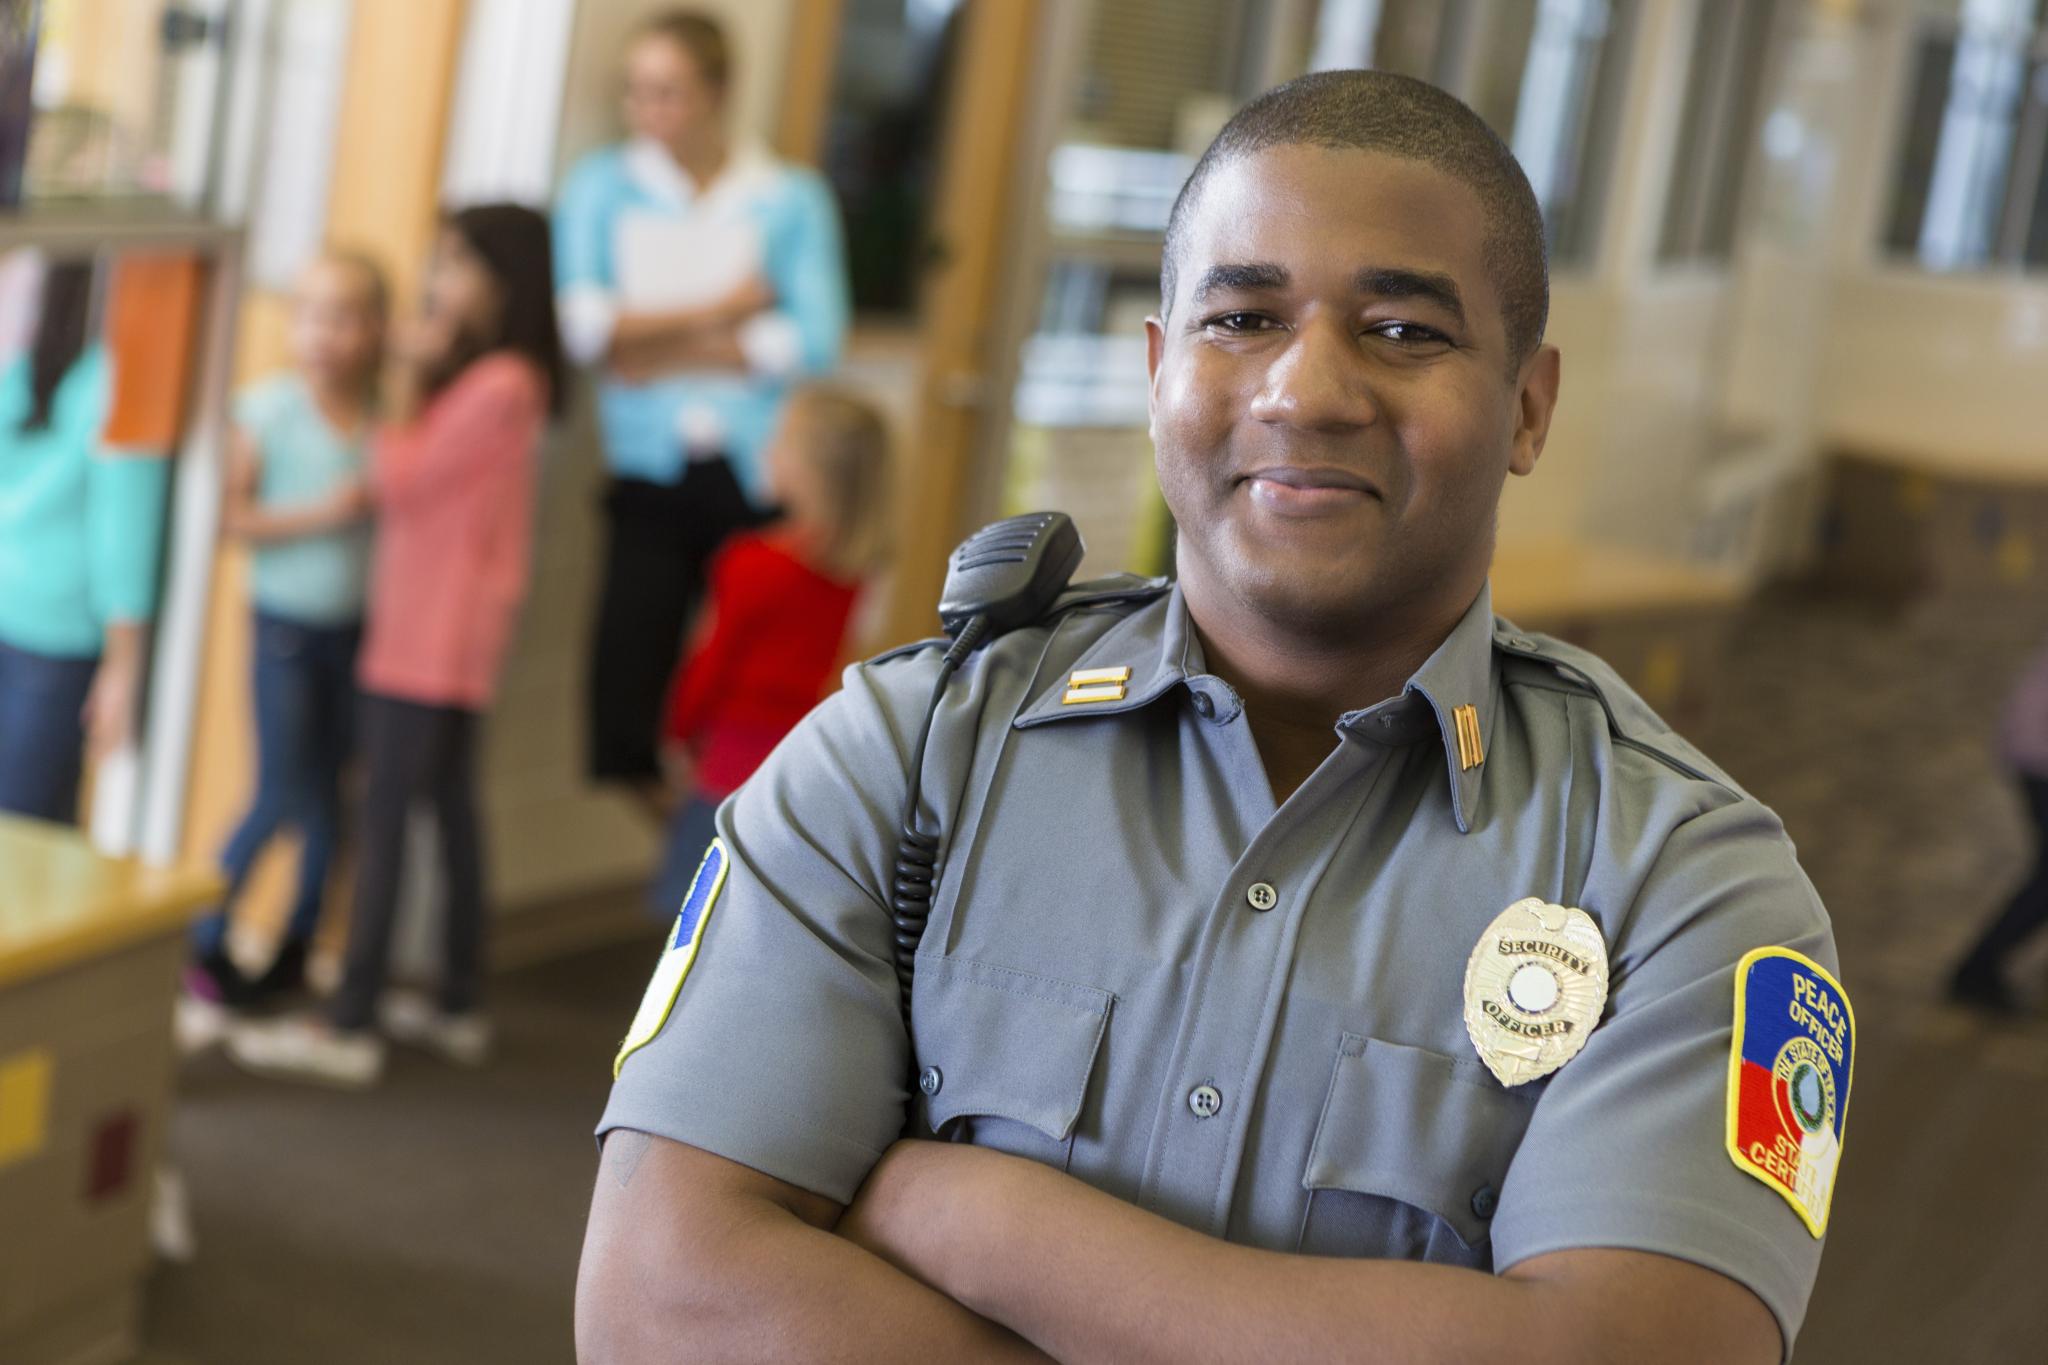 ESSENCE Poll: Are You Familiar With Your Child's School Security Protocol?